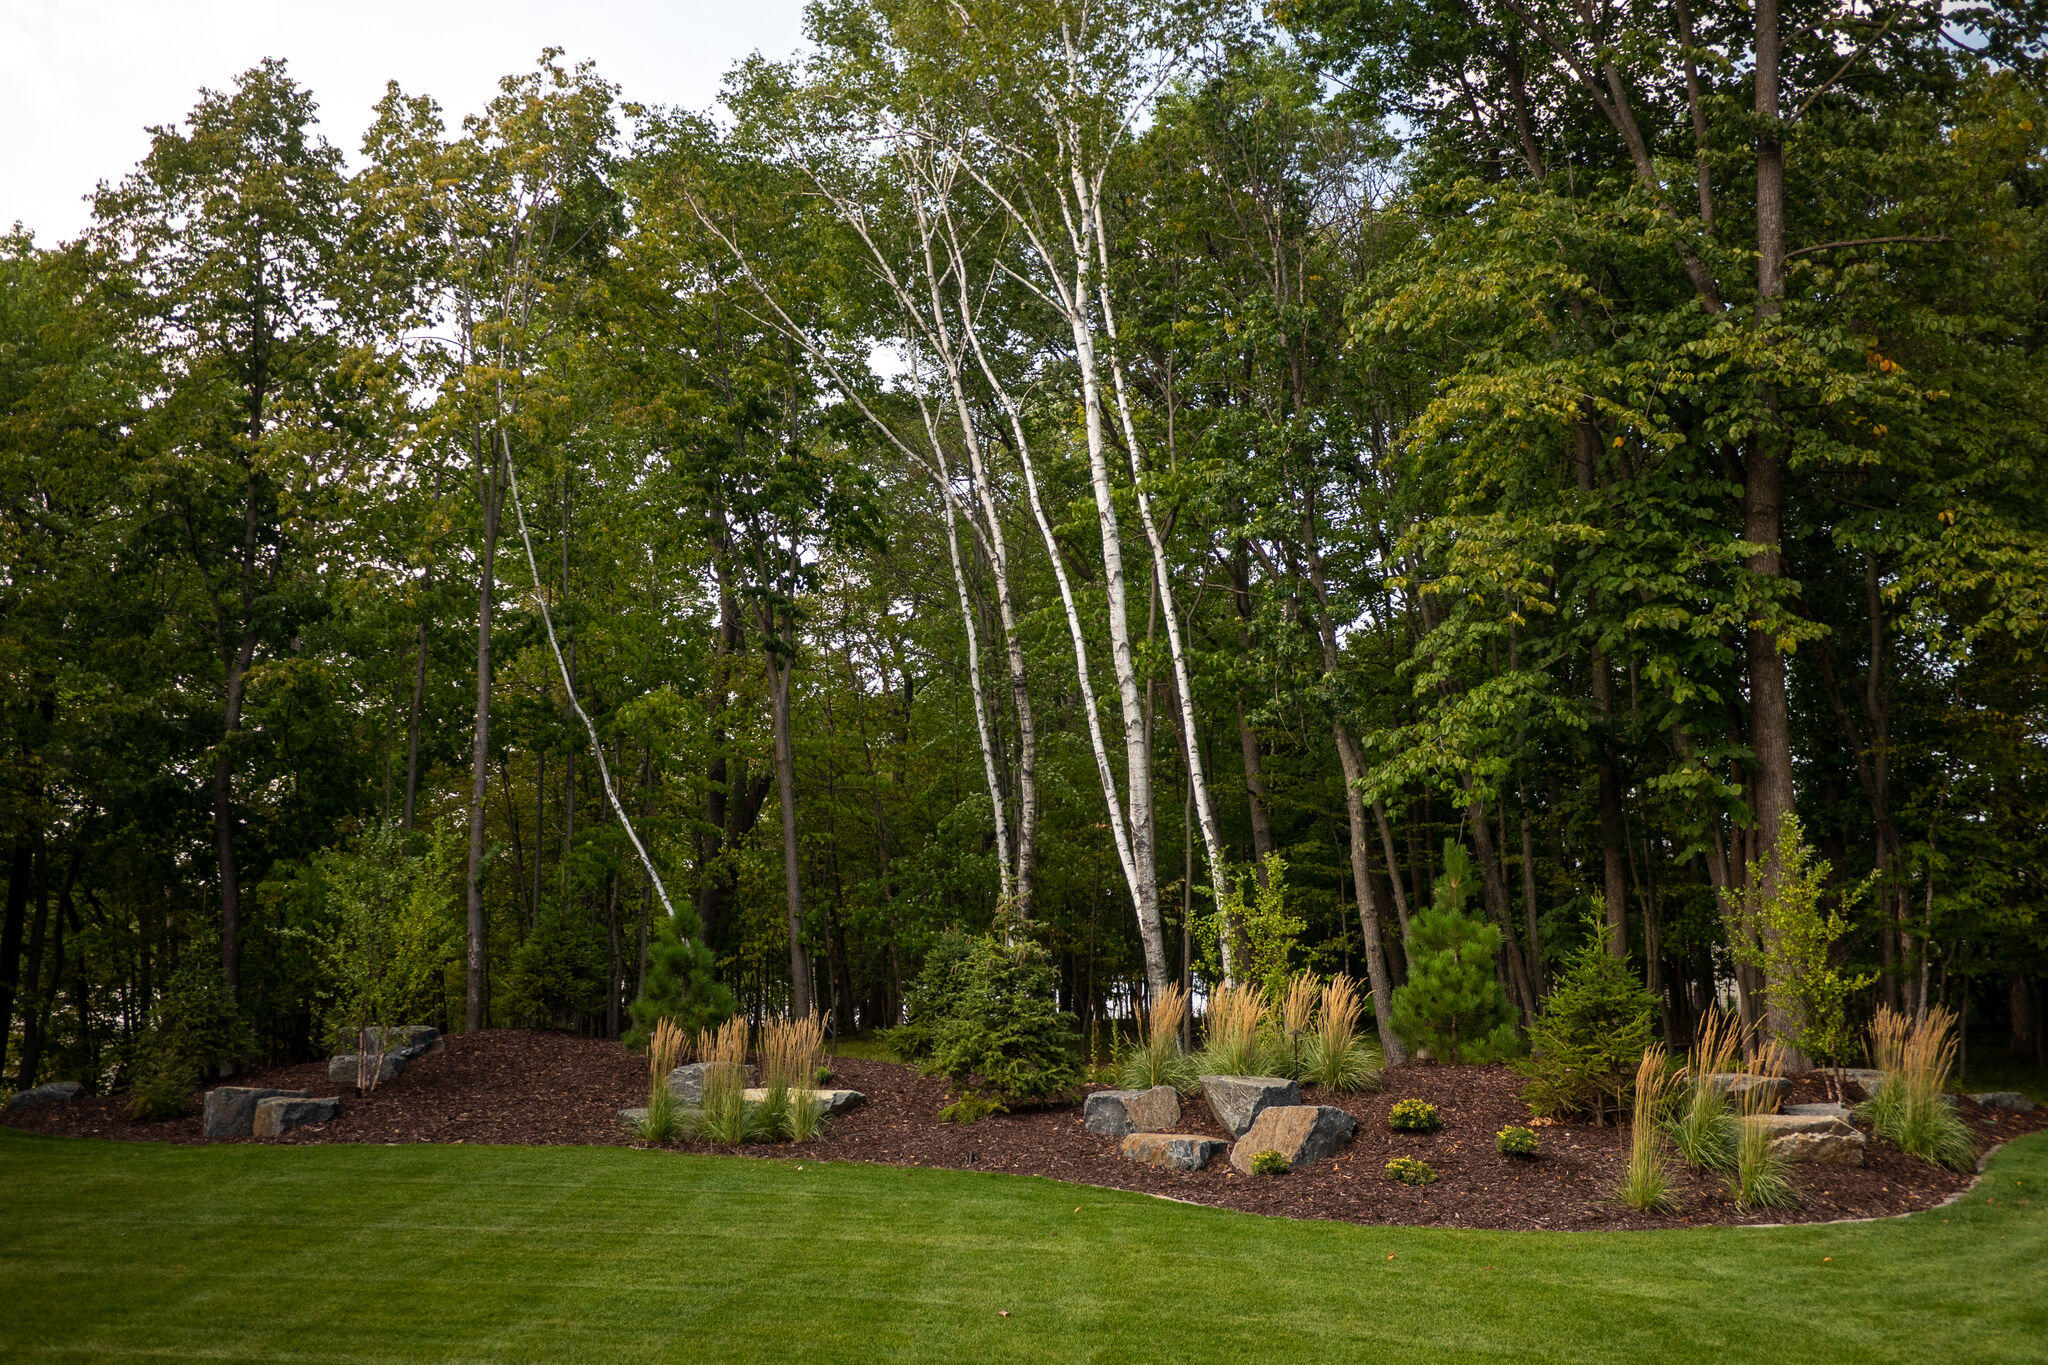 This recent project was one of our favorite ones yet. We kept the roadside landscaping minimalistic, yet polished, with the mature trees framing this incredible lake home. With the addition of fresh mulch, shrubbery, and decorative rock, the roadside landscaping makes a great first impression.